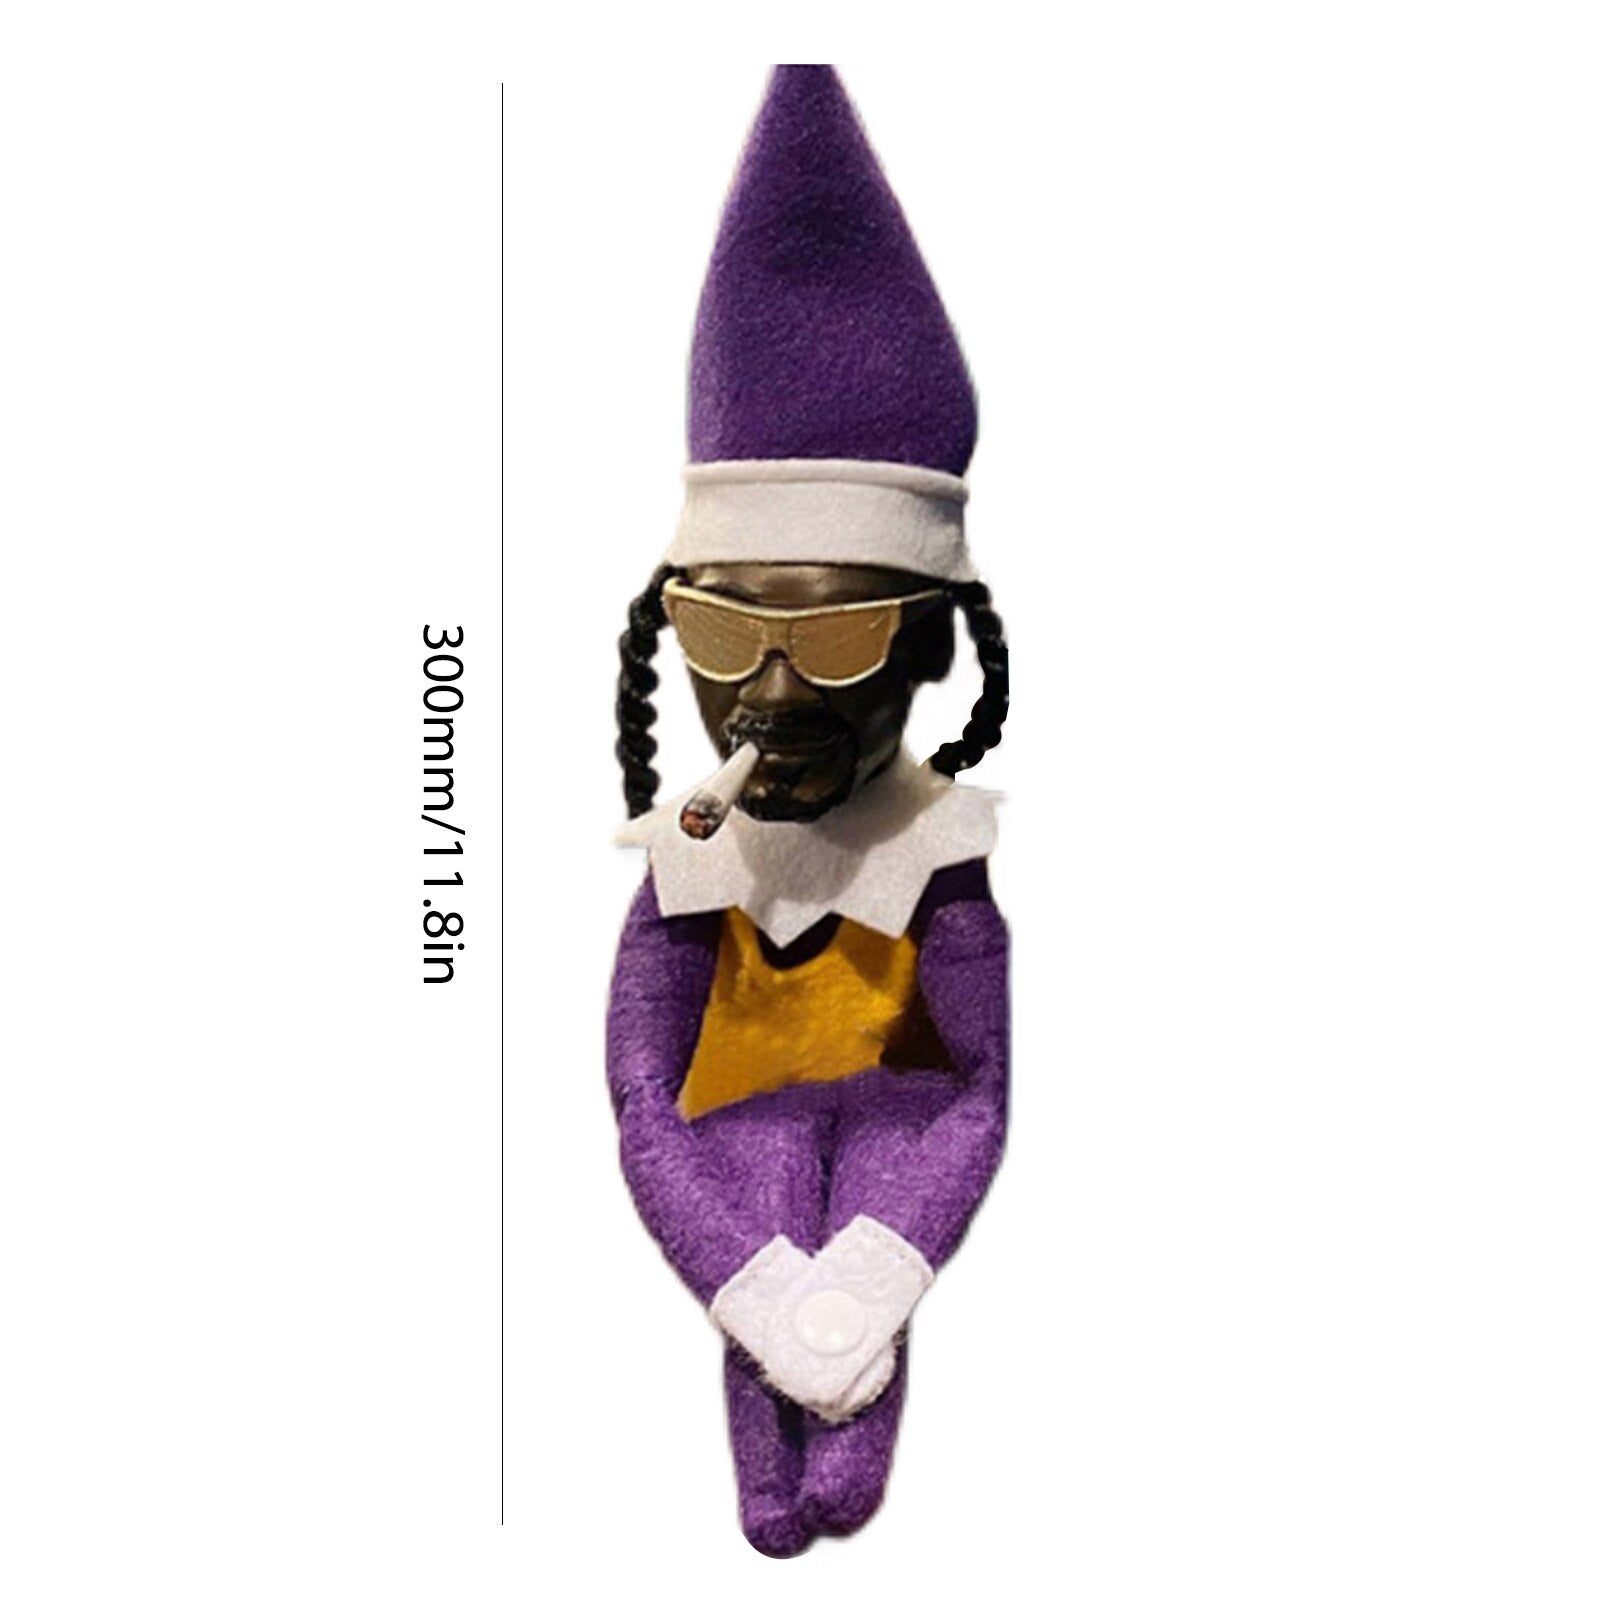 Snoop on A Stoop Christmas Elf Doll Home Decorations Elf On The Shelf Doll  Crafts New Year Christmas Holiday Gift for Children 2